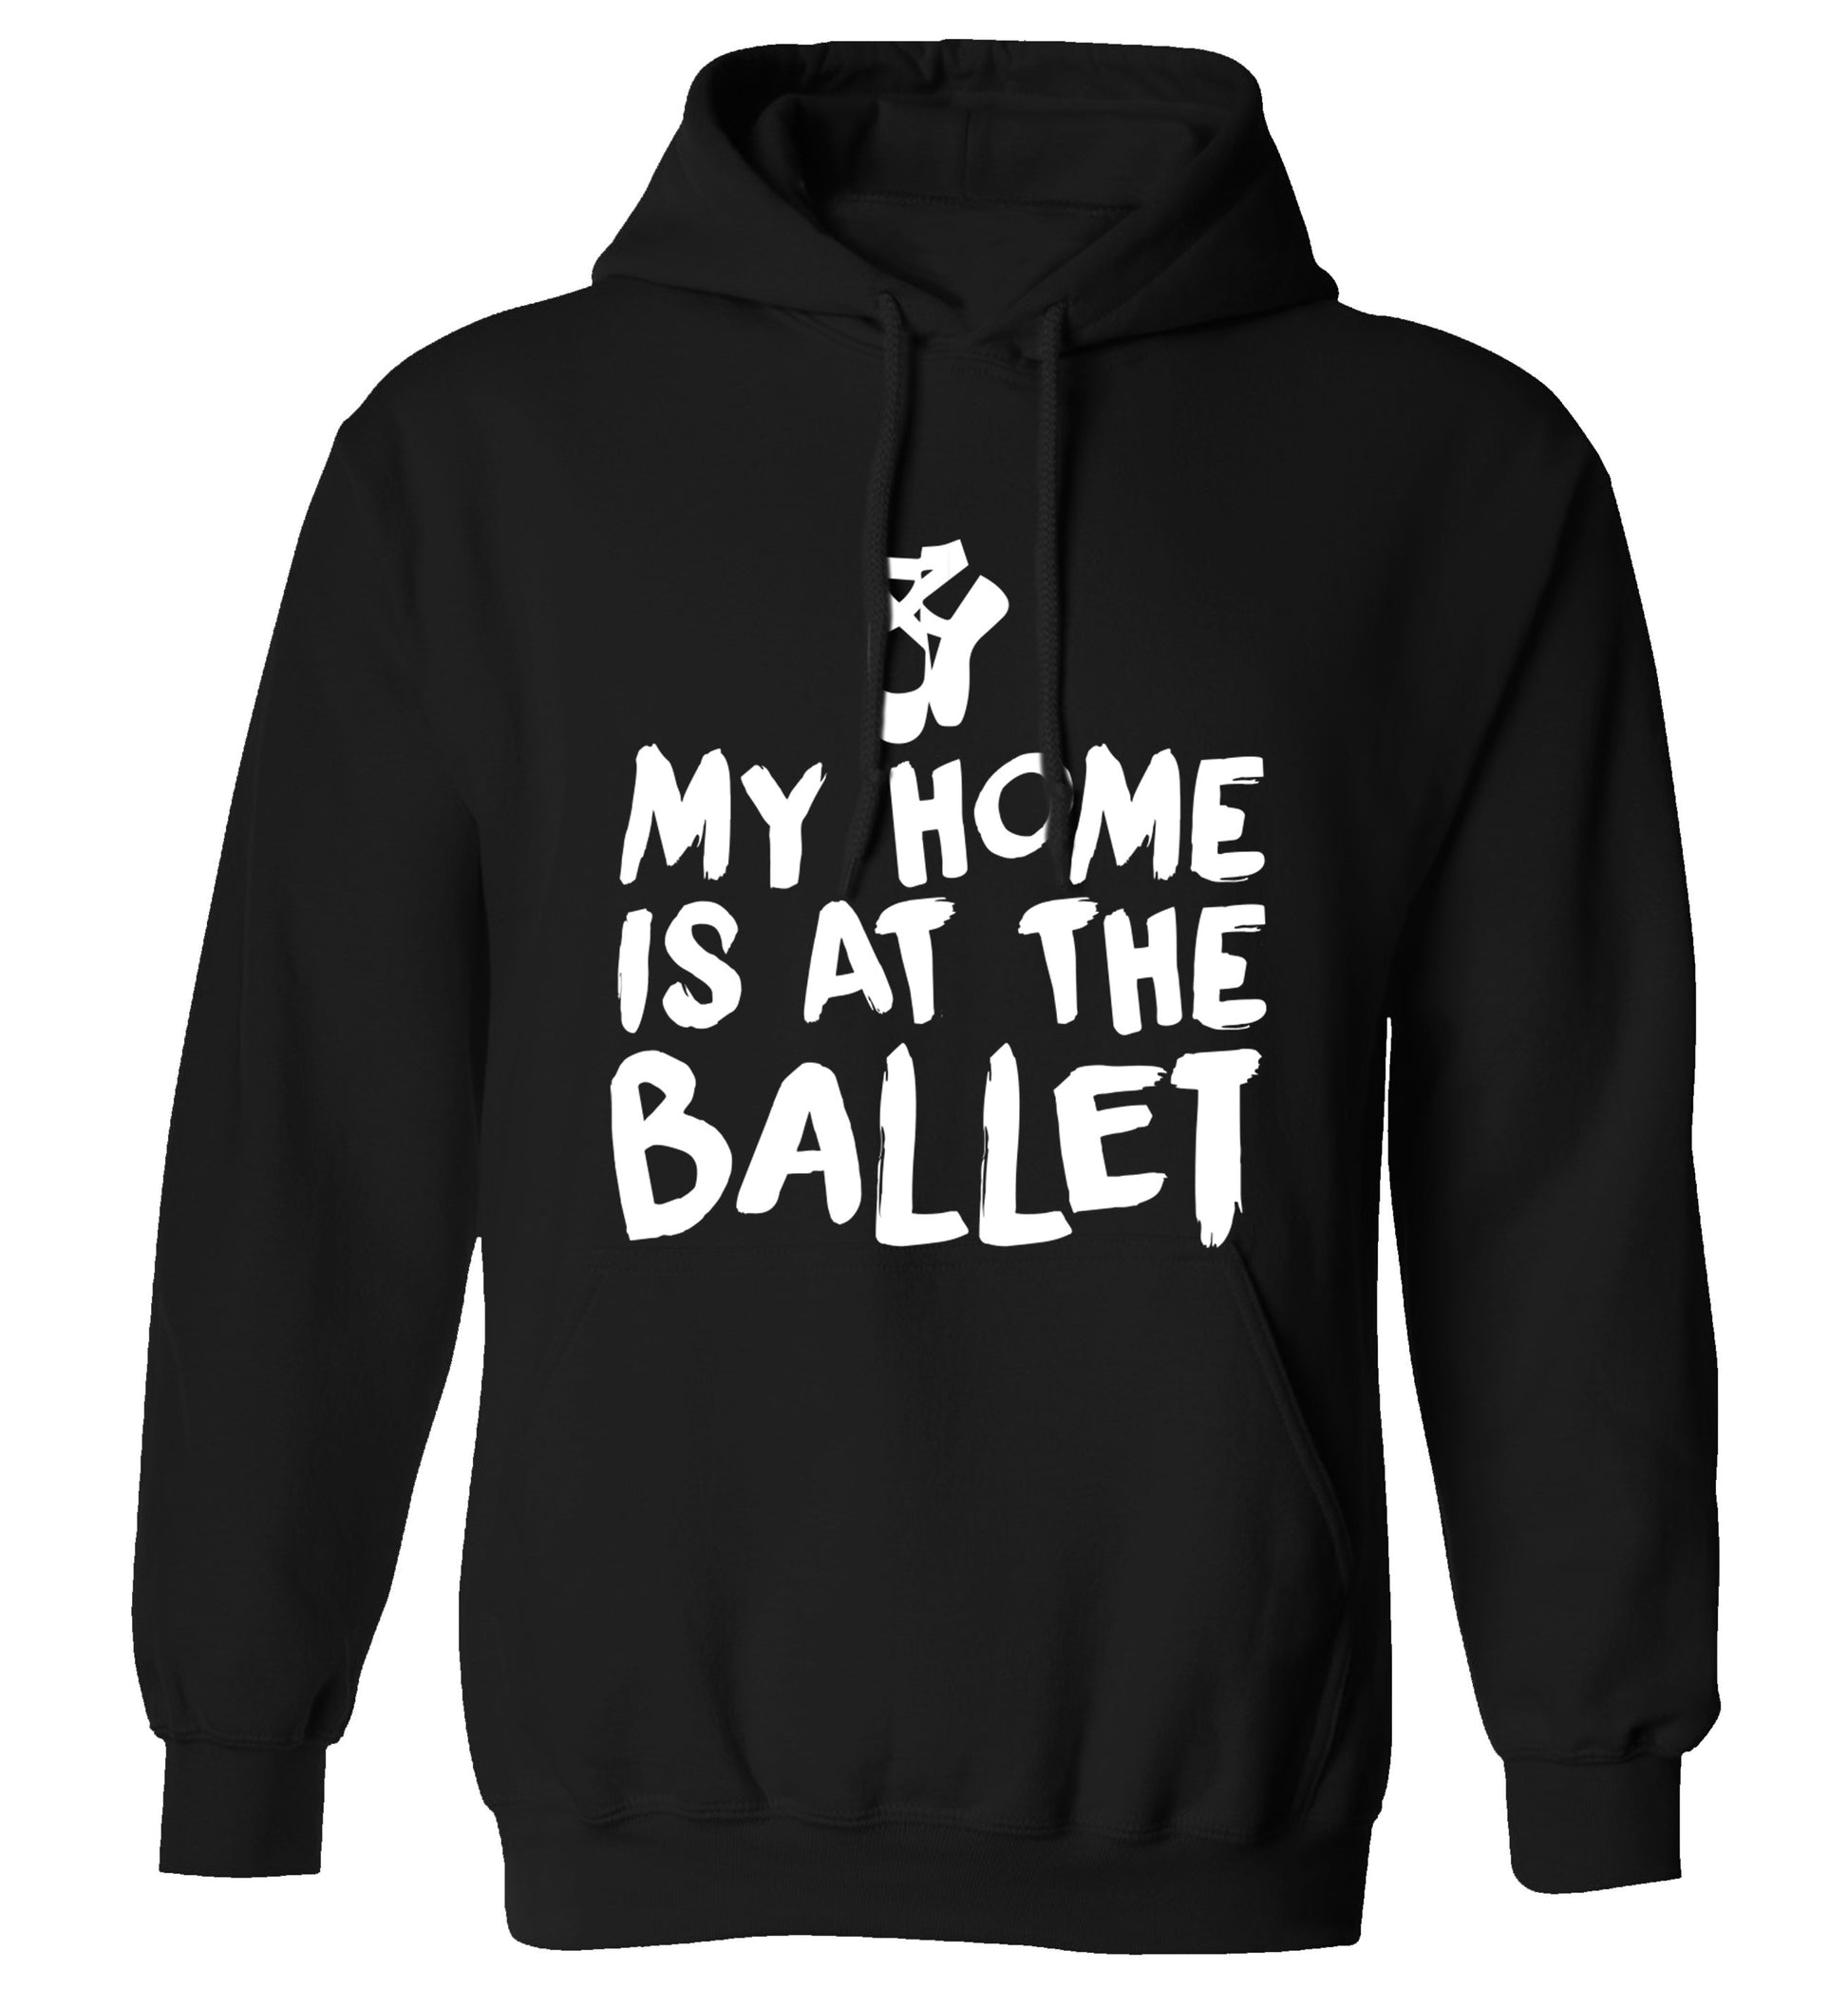 My home is at the dance studio adults unisex black hoodie 2XL